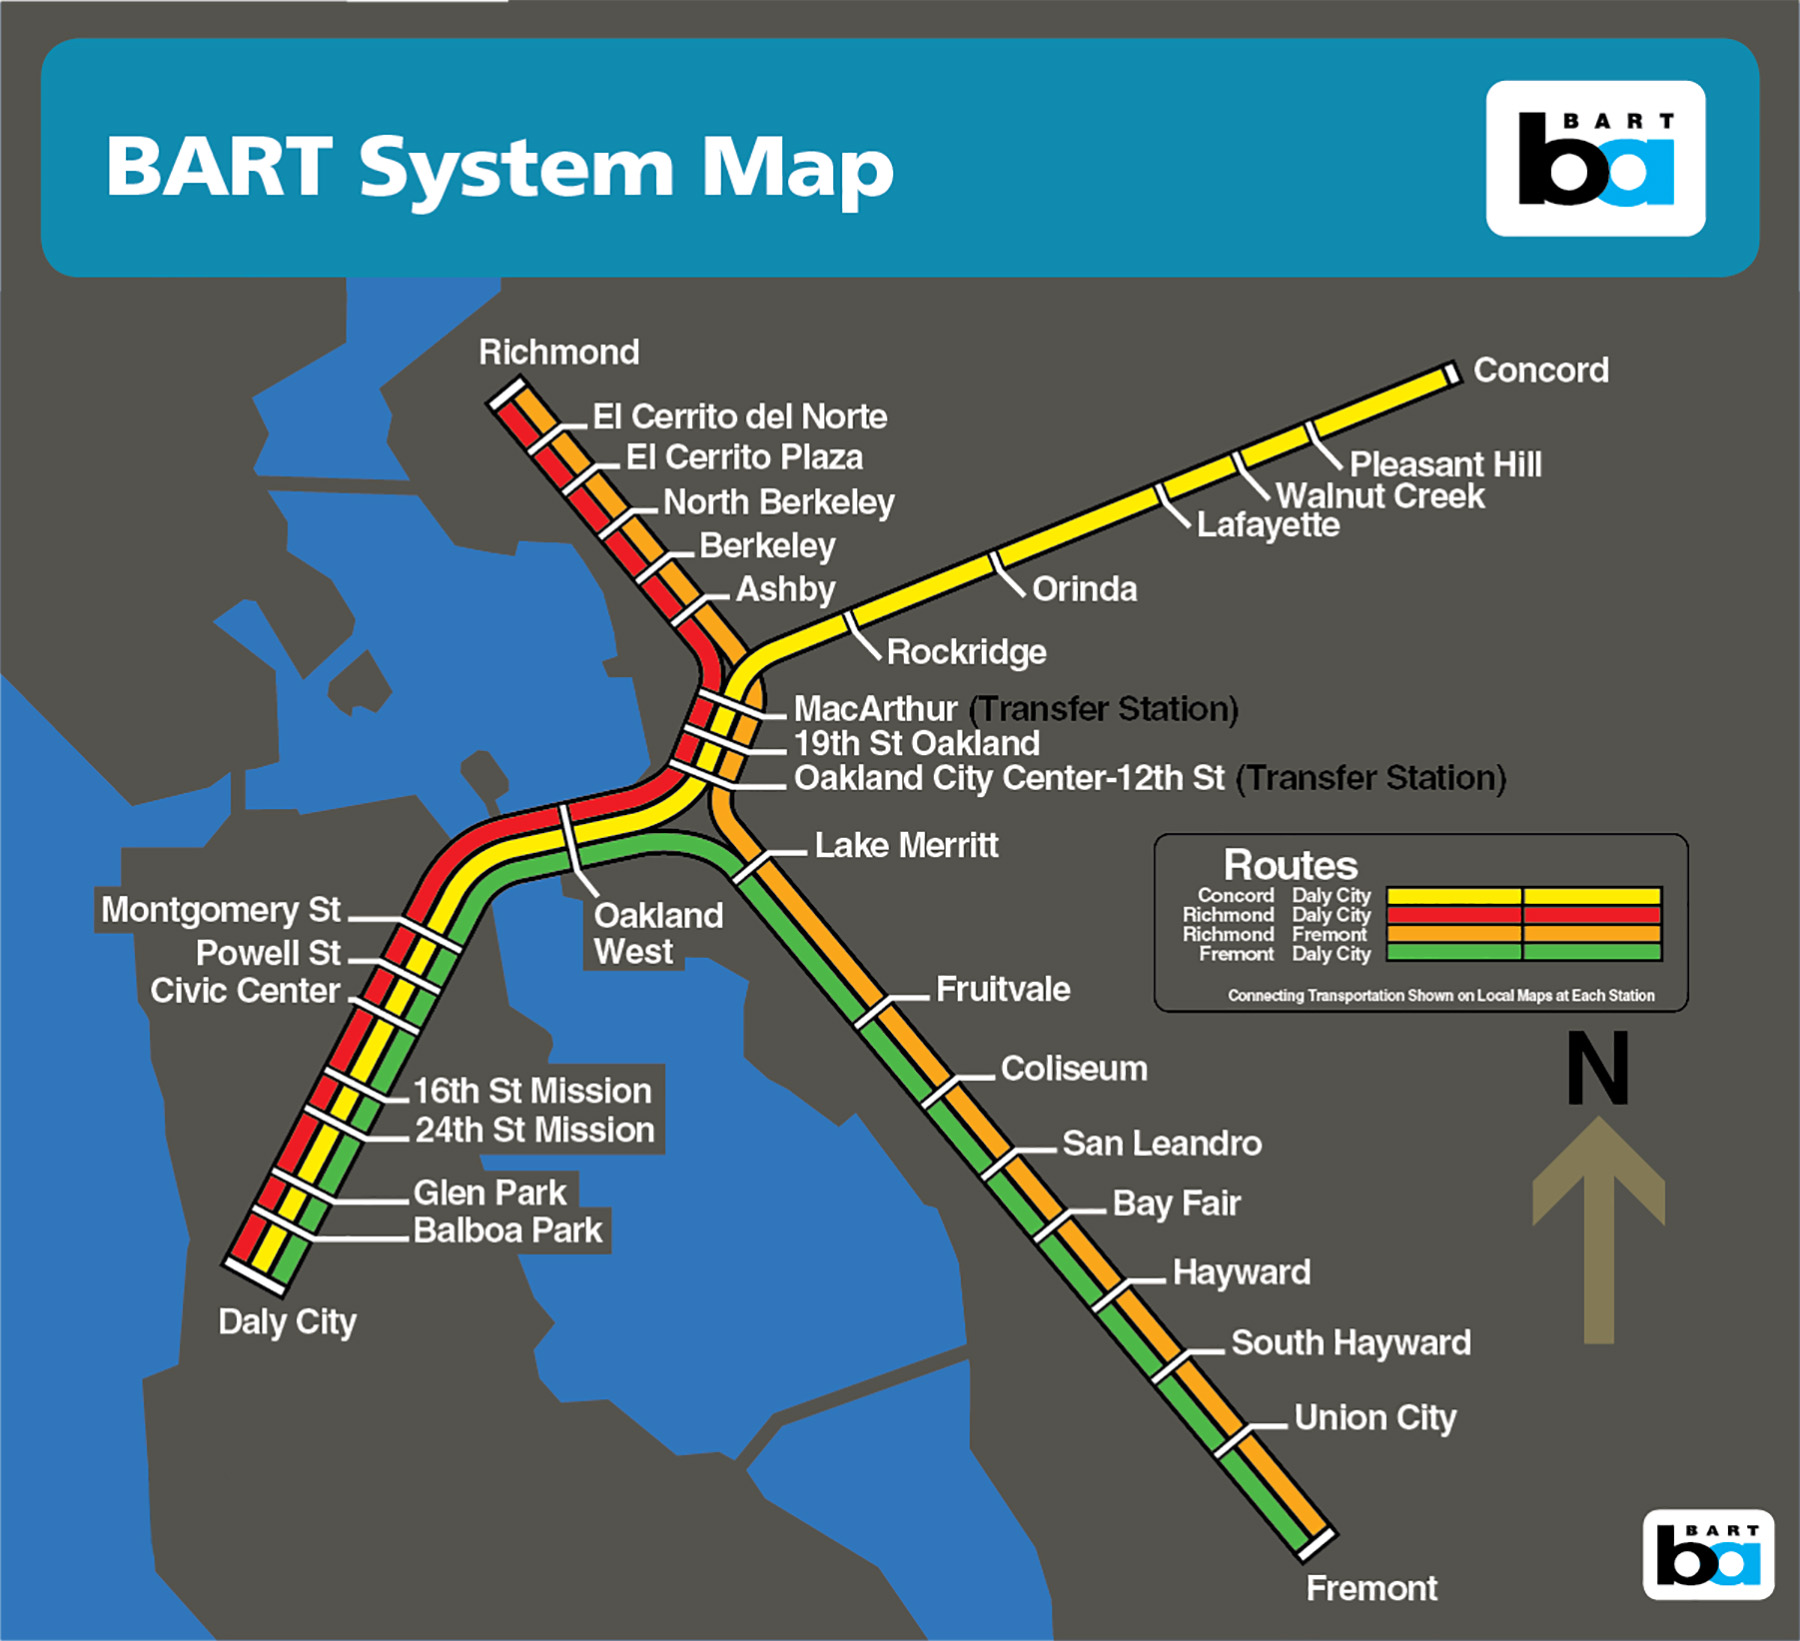 Map shows the BART transit system in 1974 